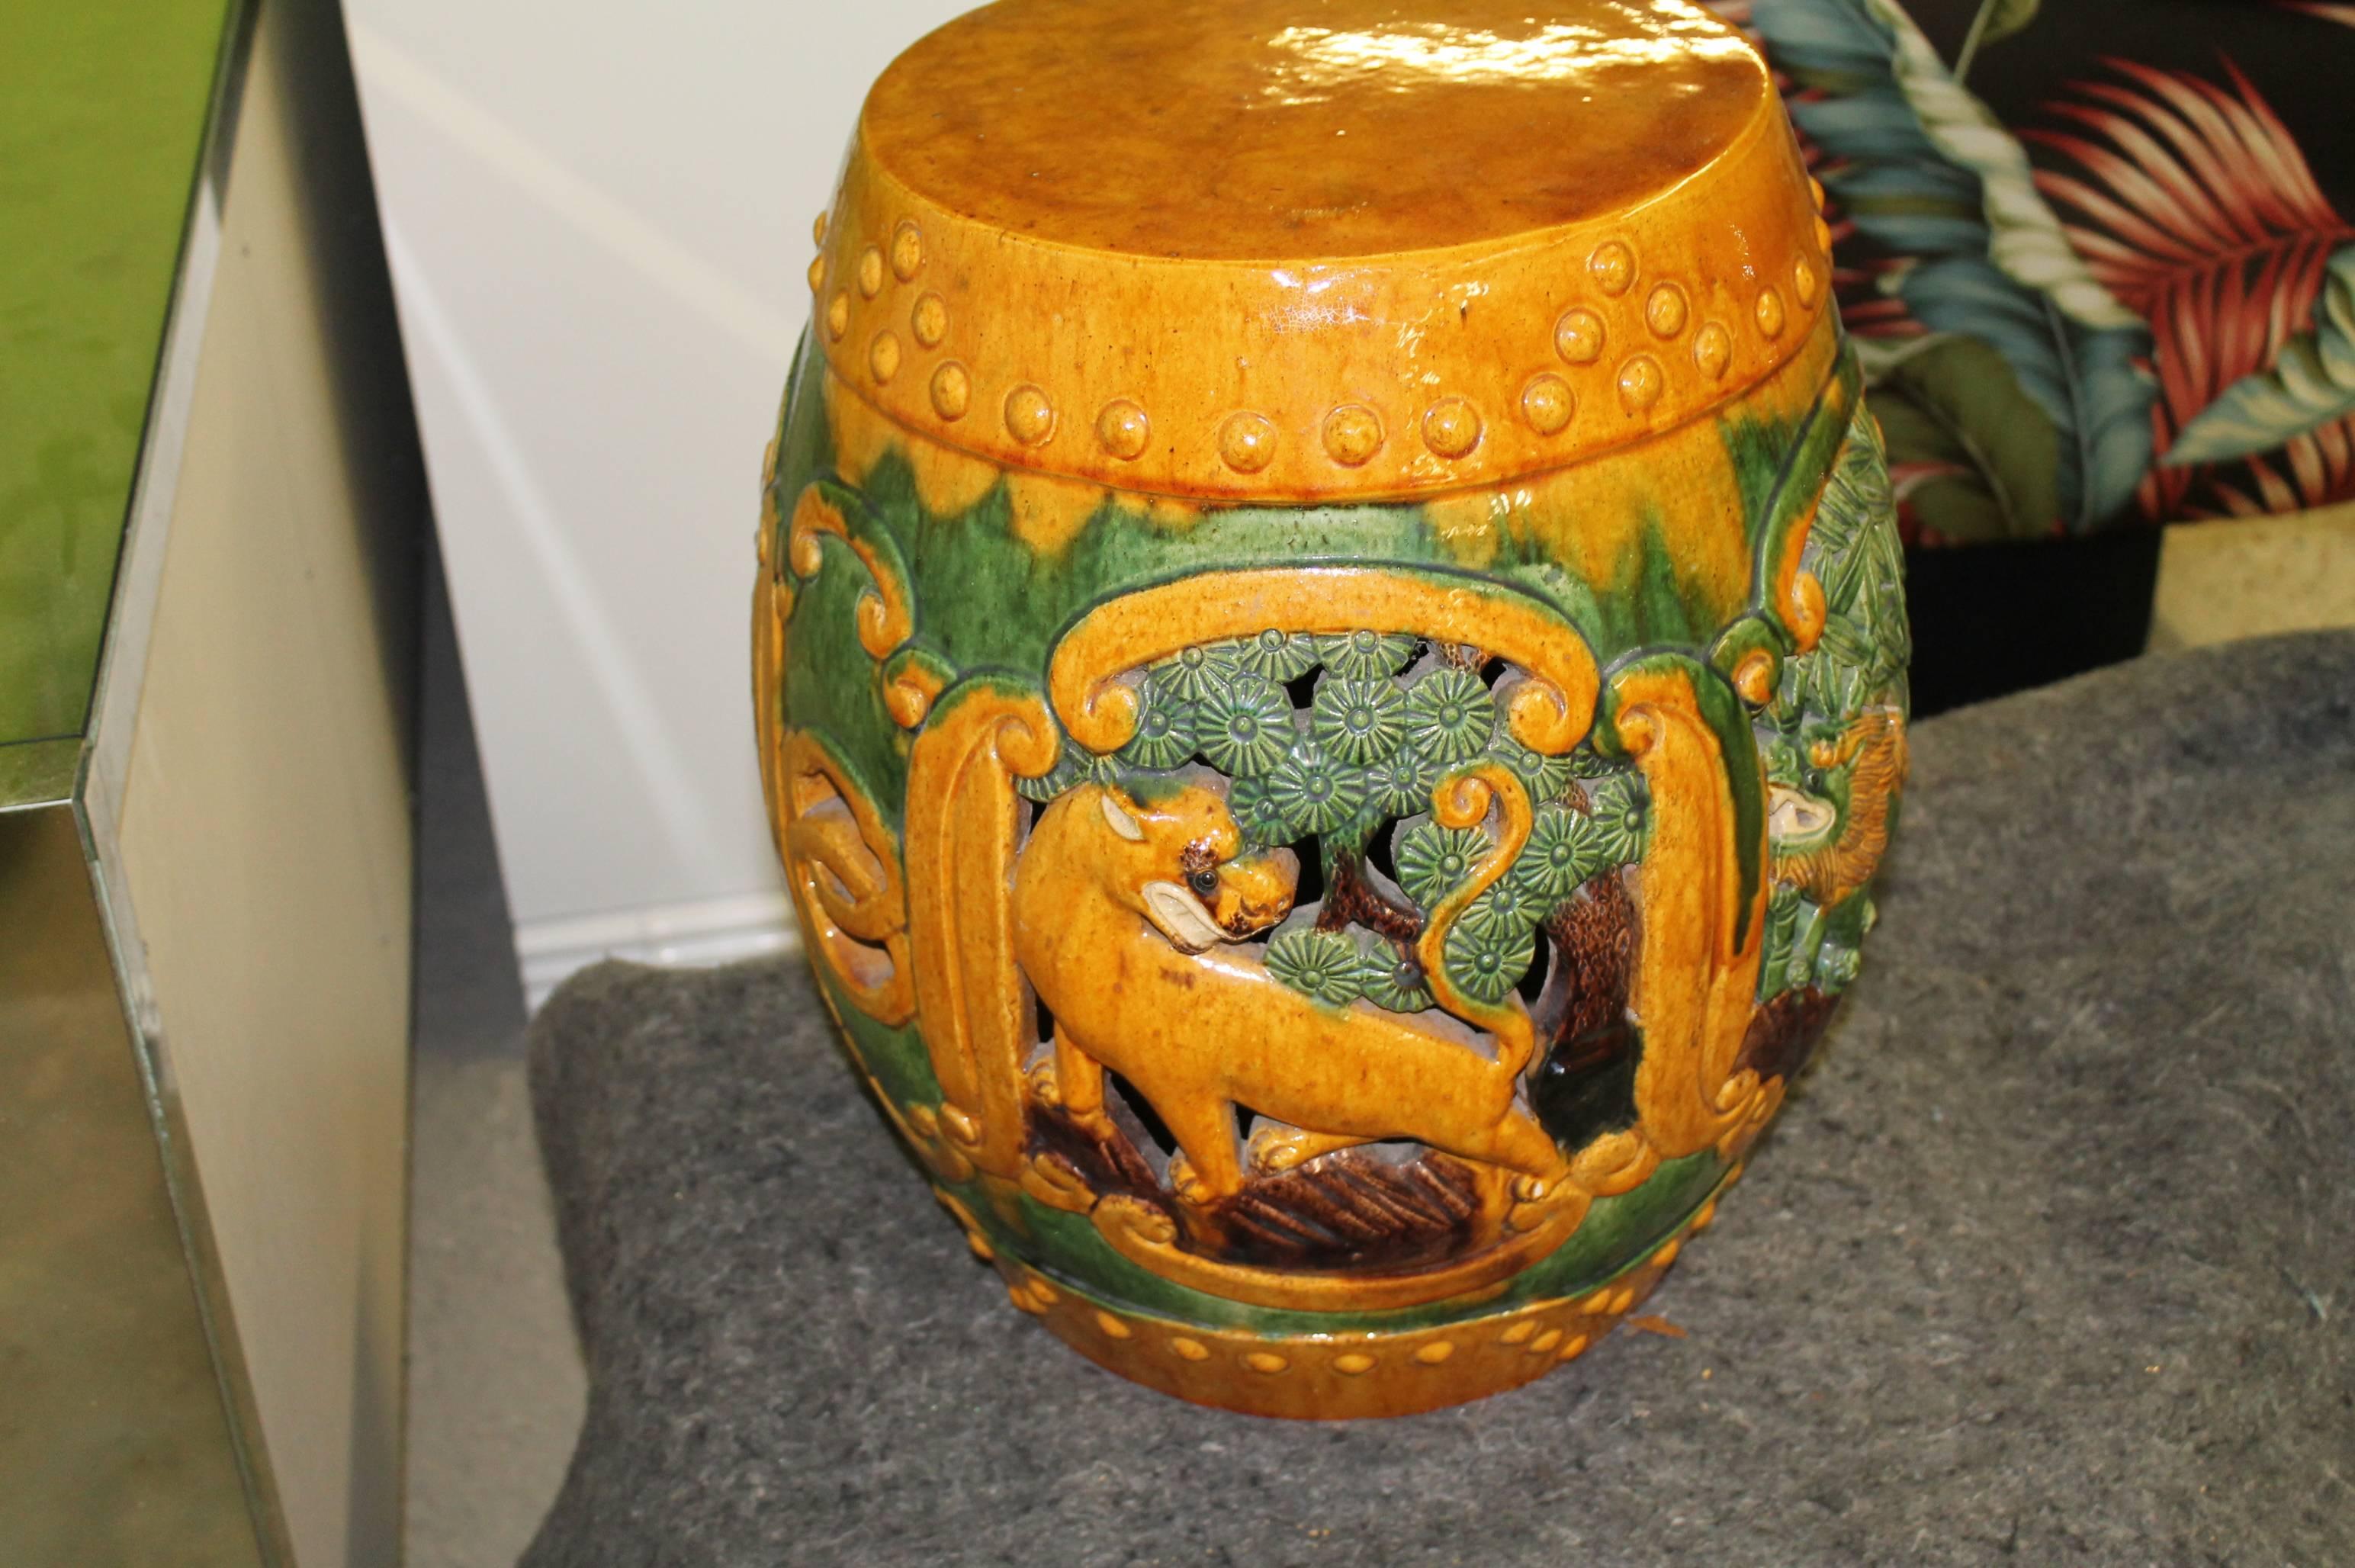 20th Century  Vintage Pair of Ceramic Garden Drum Stools or Stands with Camels and Elephants